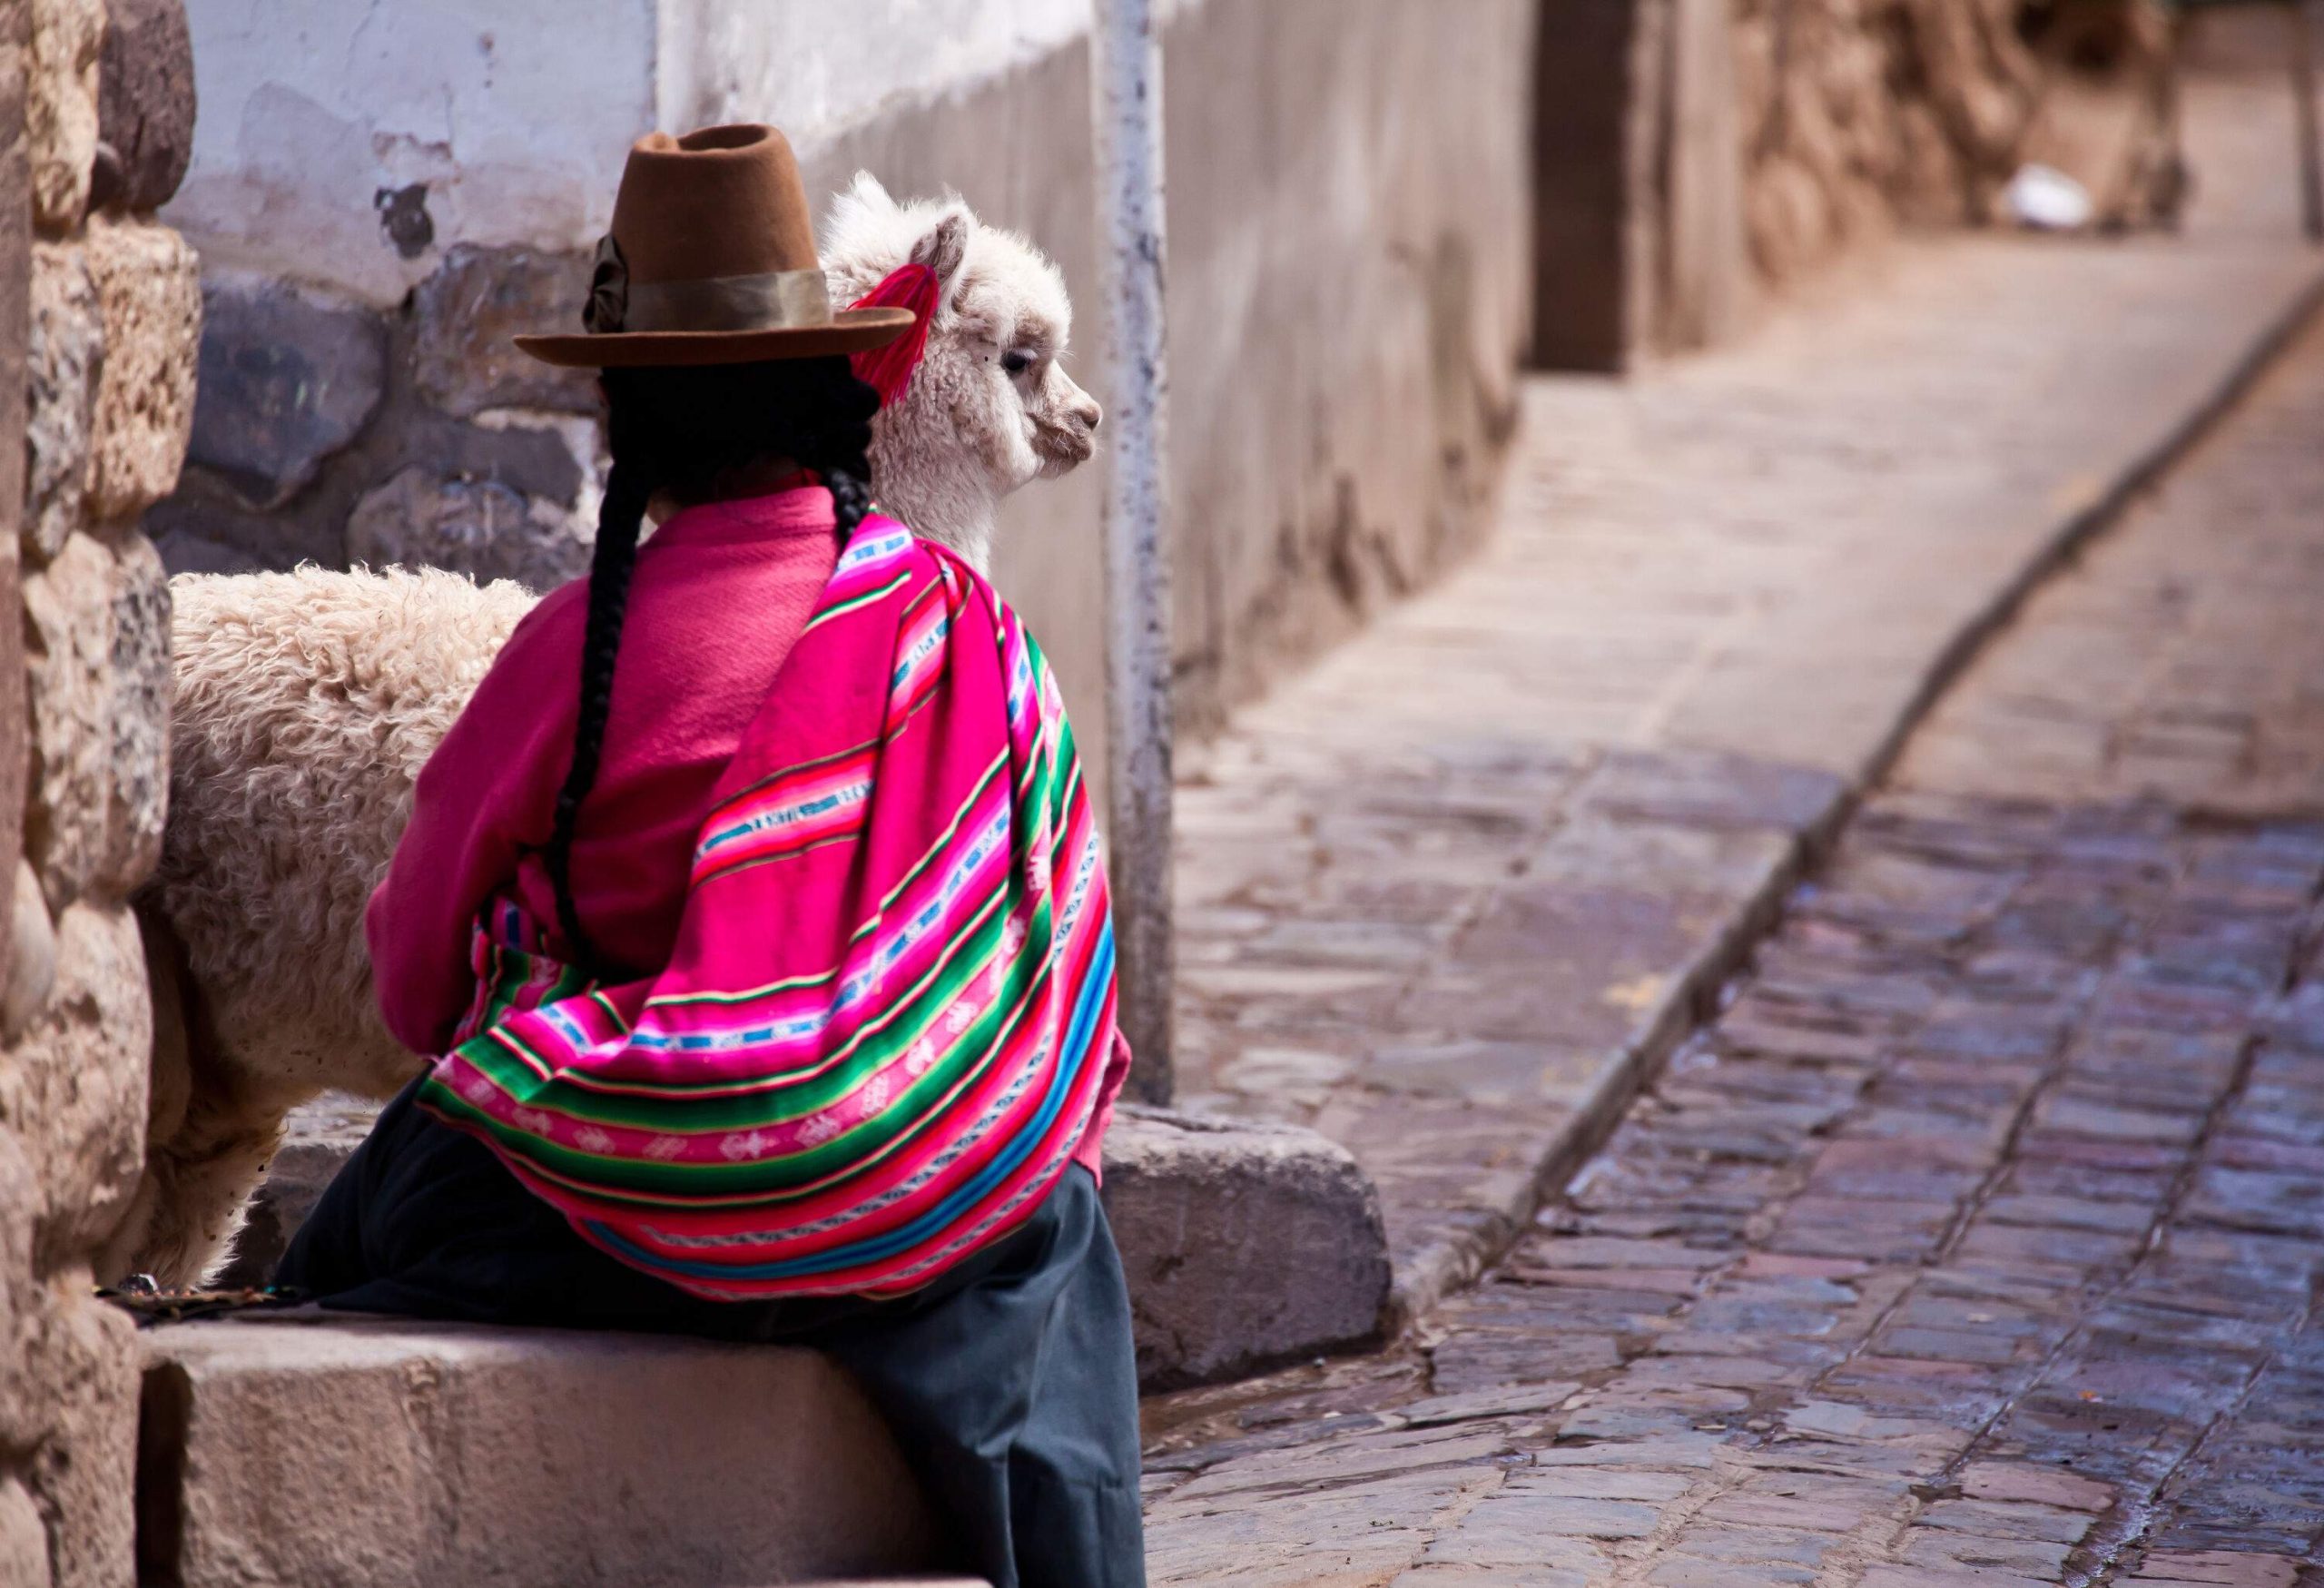 A woman adorned in vibrant traditional clothing sits gracefully on a stone along the sidewalk, accompanied by a llama.